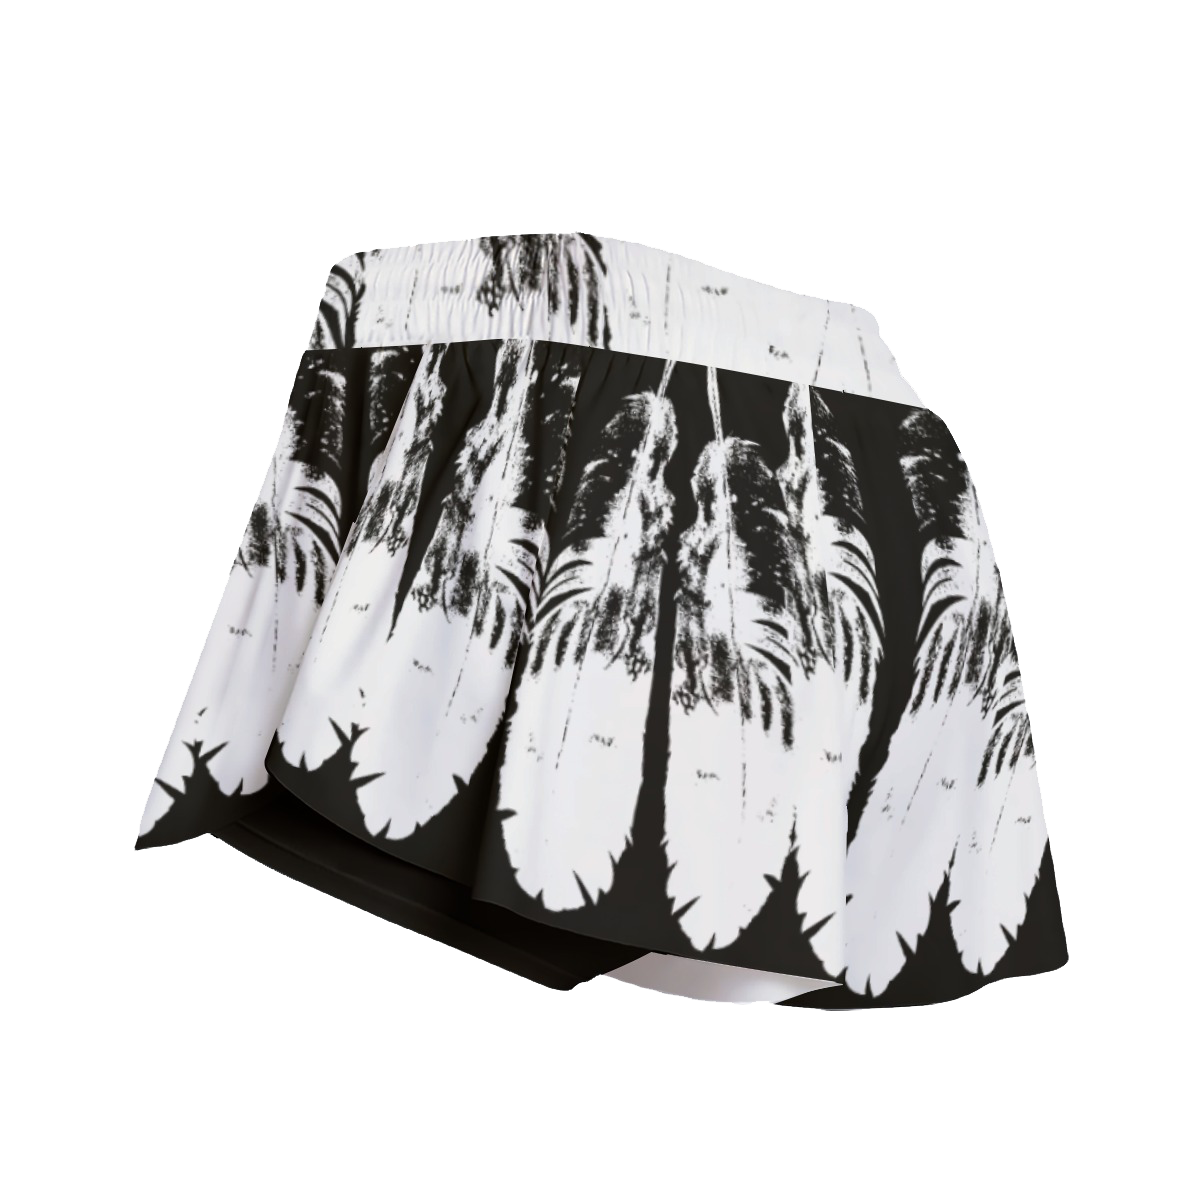 inverted*white*indigenous*native*american*eagle*feather*shorts*skorts*women's